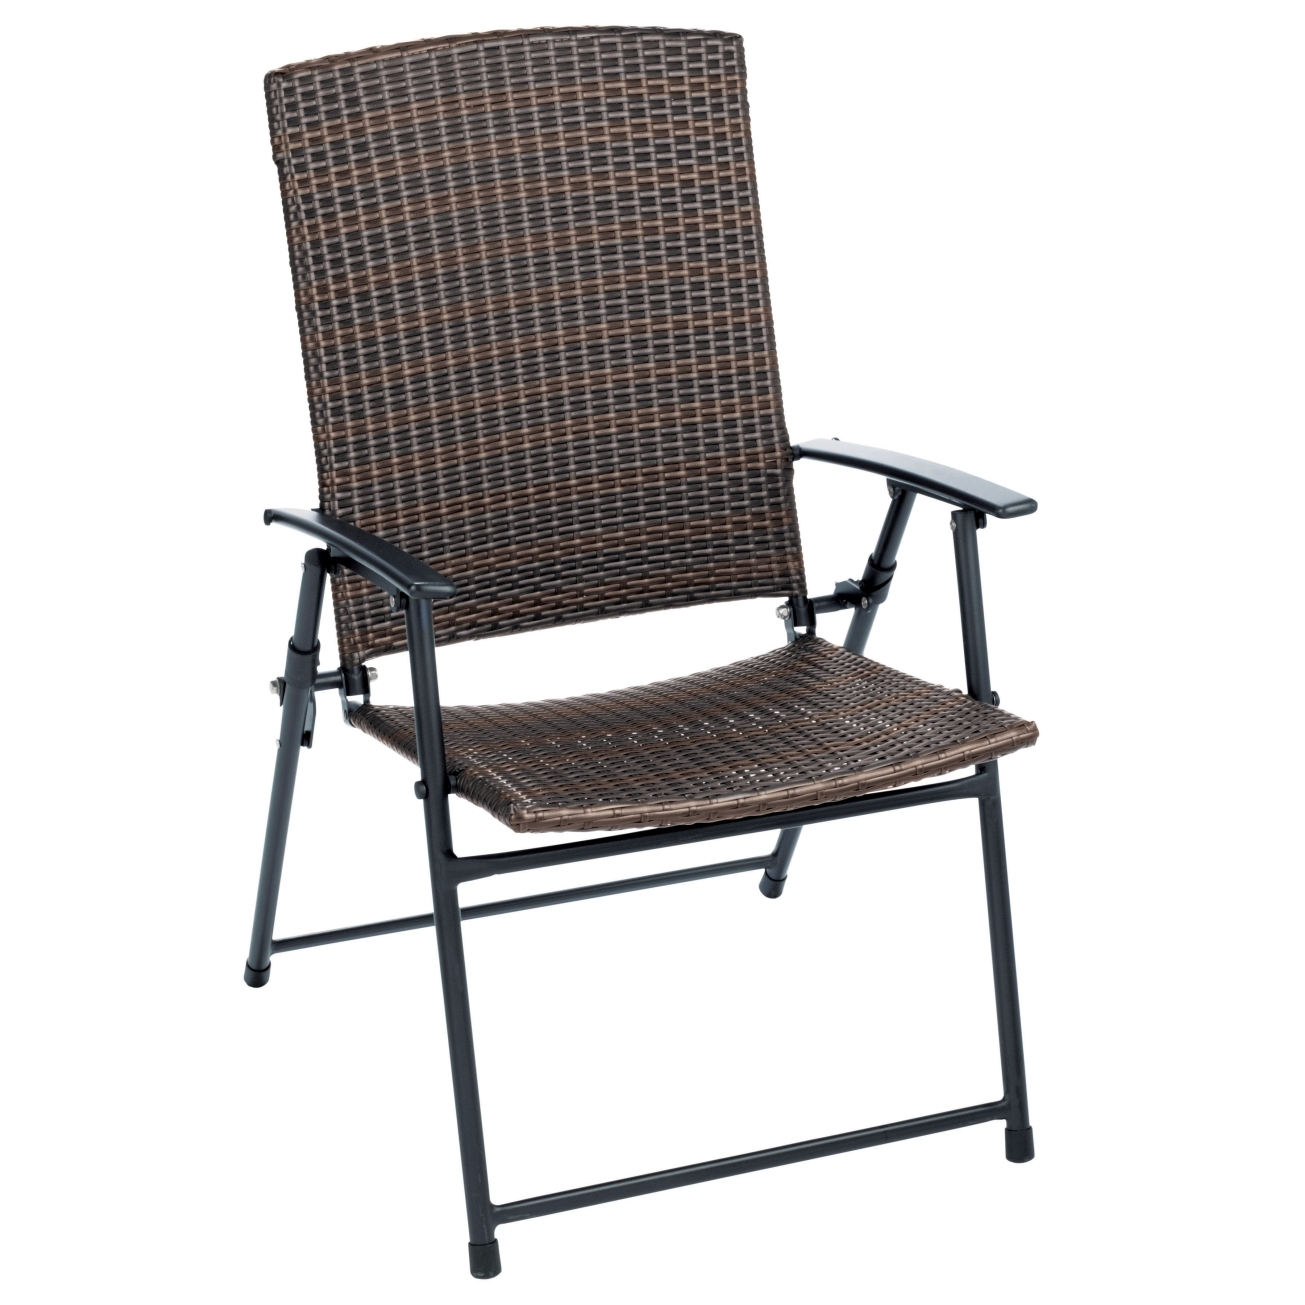 Set of 4 Living Accents Folding Wicker Patio Chairs - FRS50852 - Steel - Mocha Brown